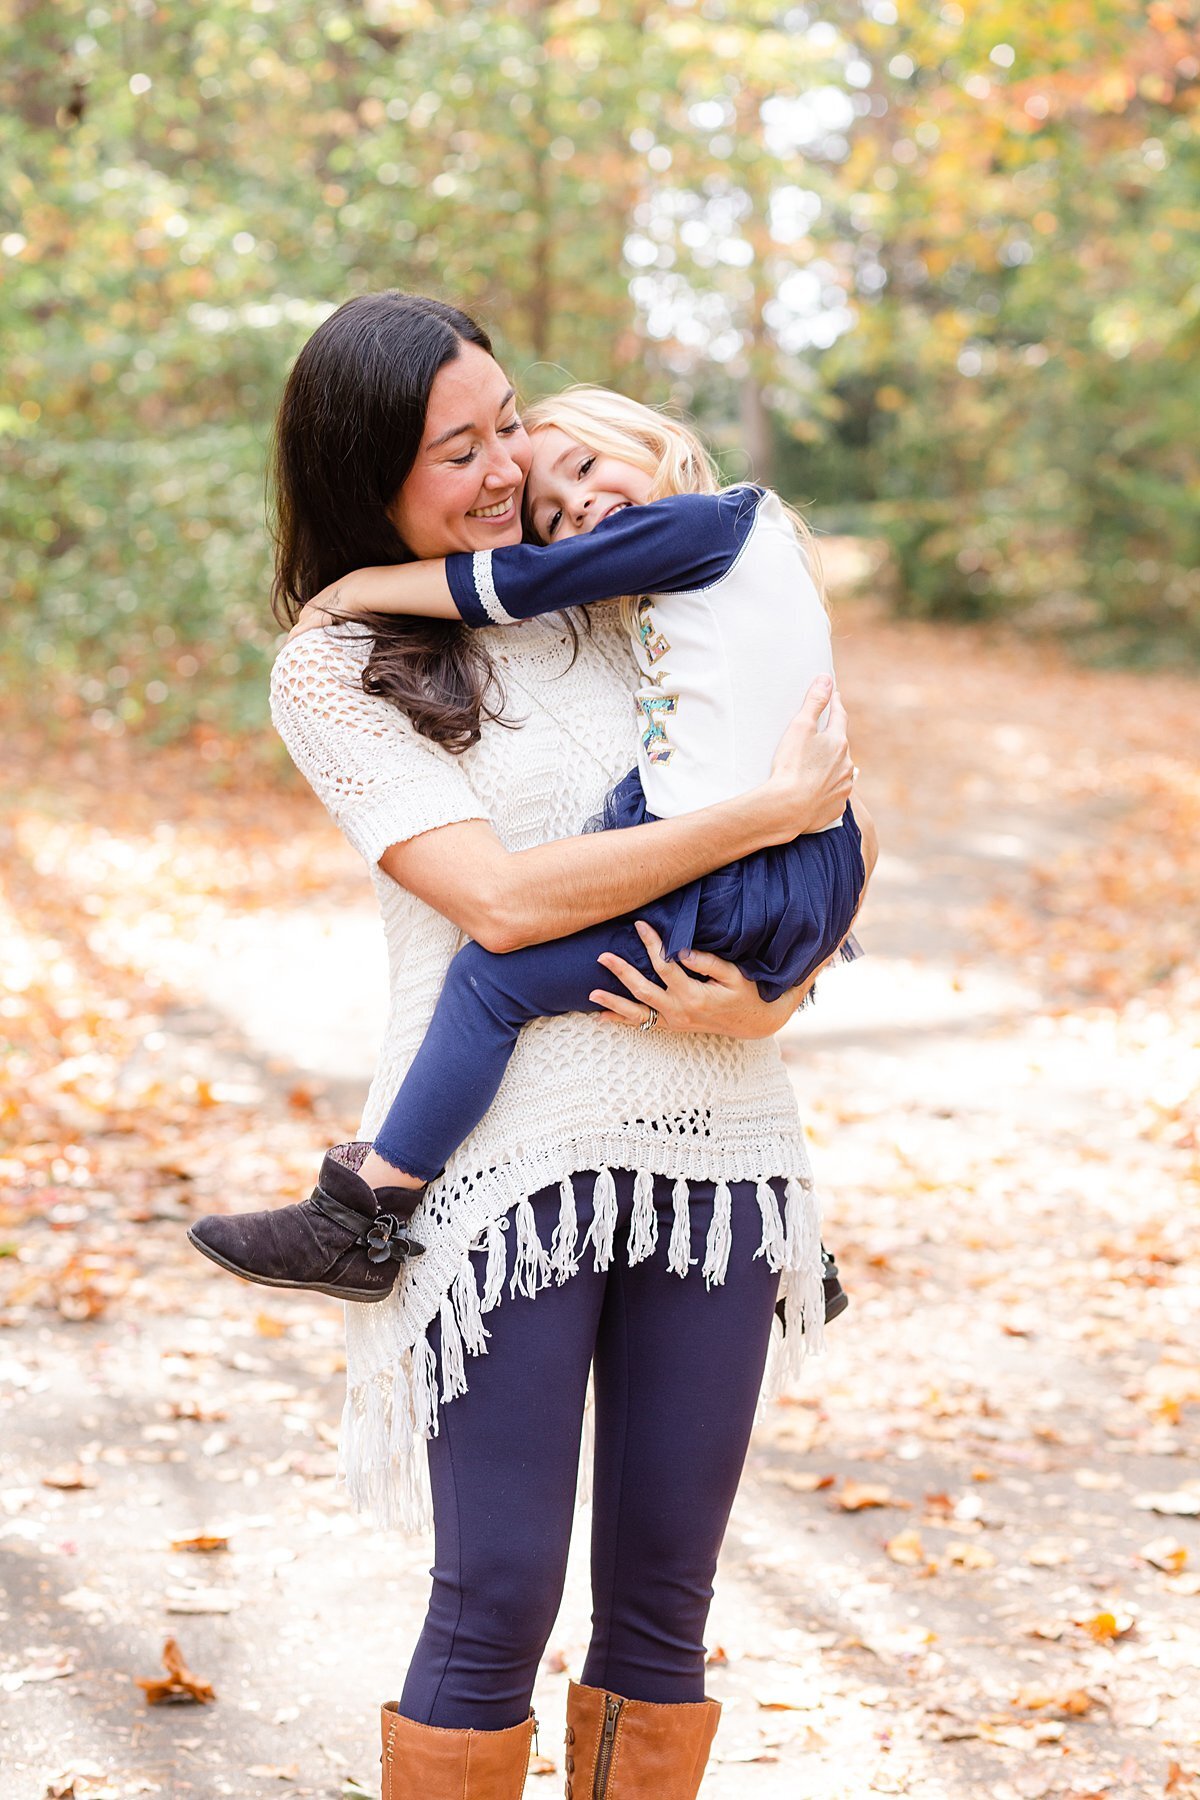 outdoor-fall-mini-sessions-cleveland-park-greenville-sc-6